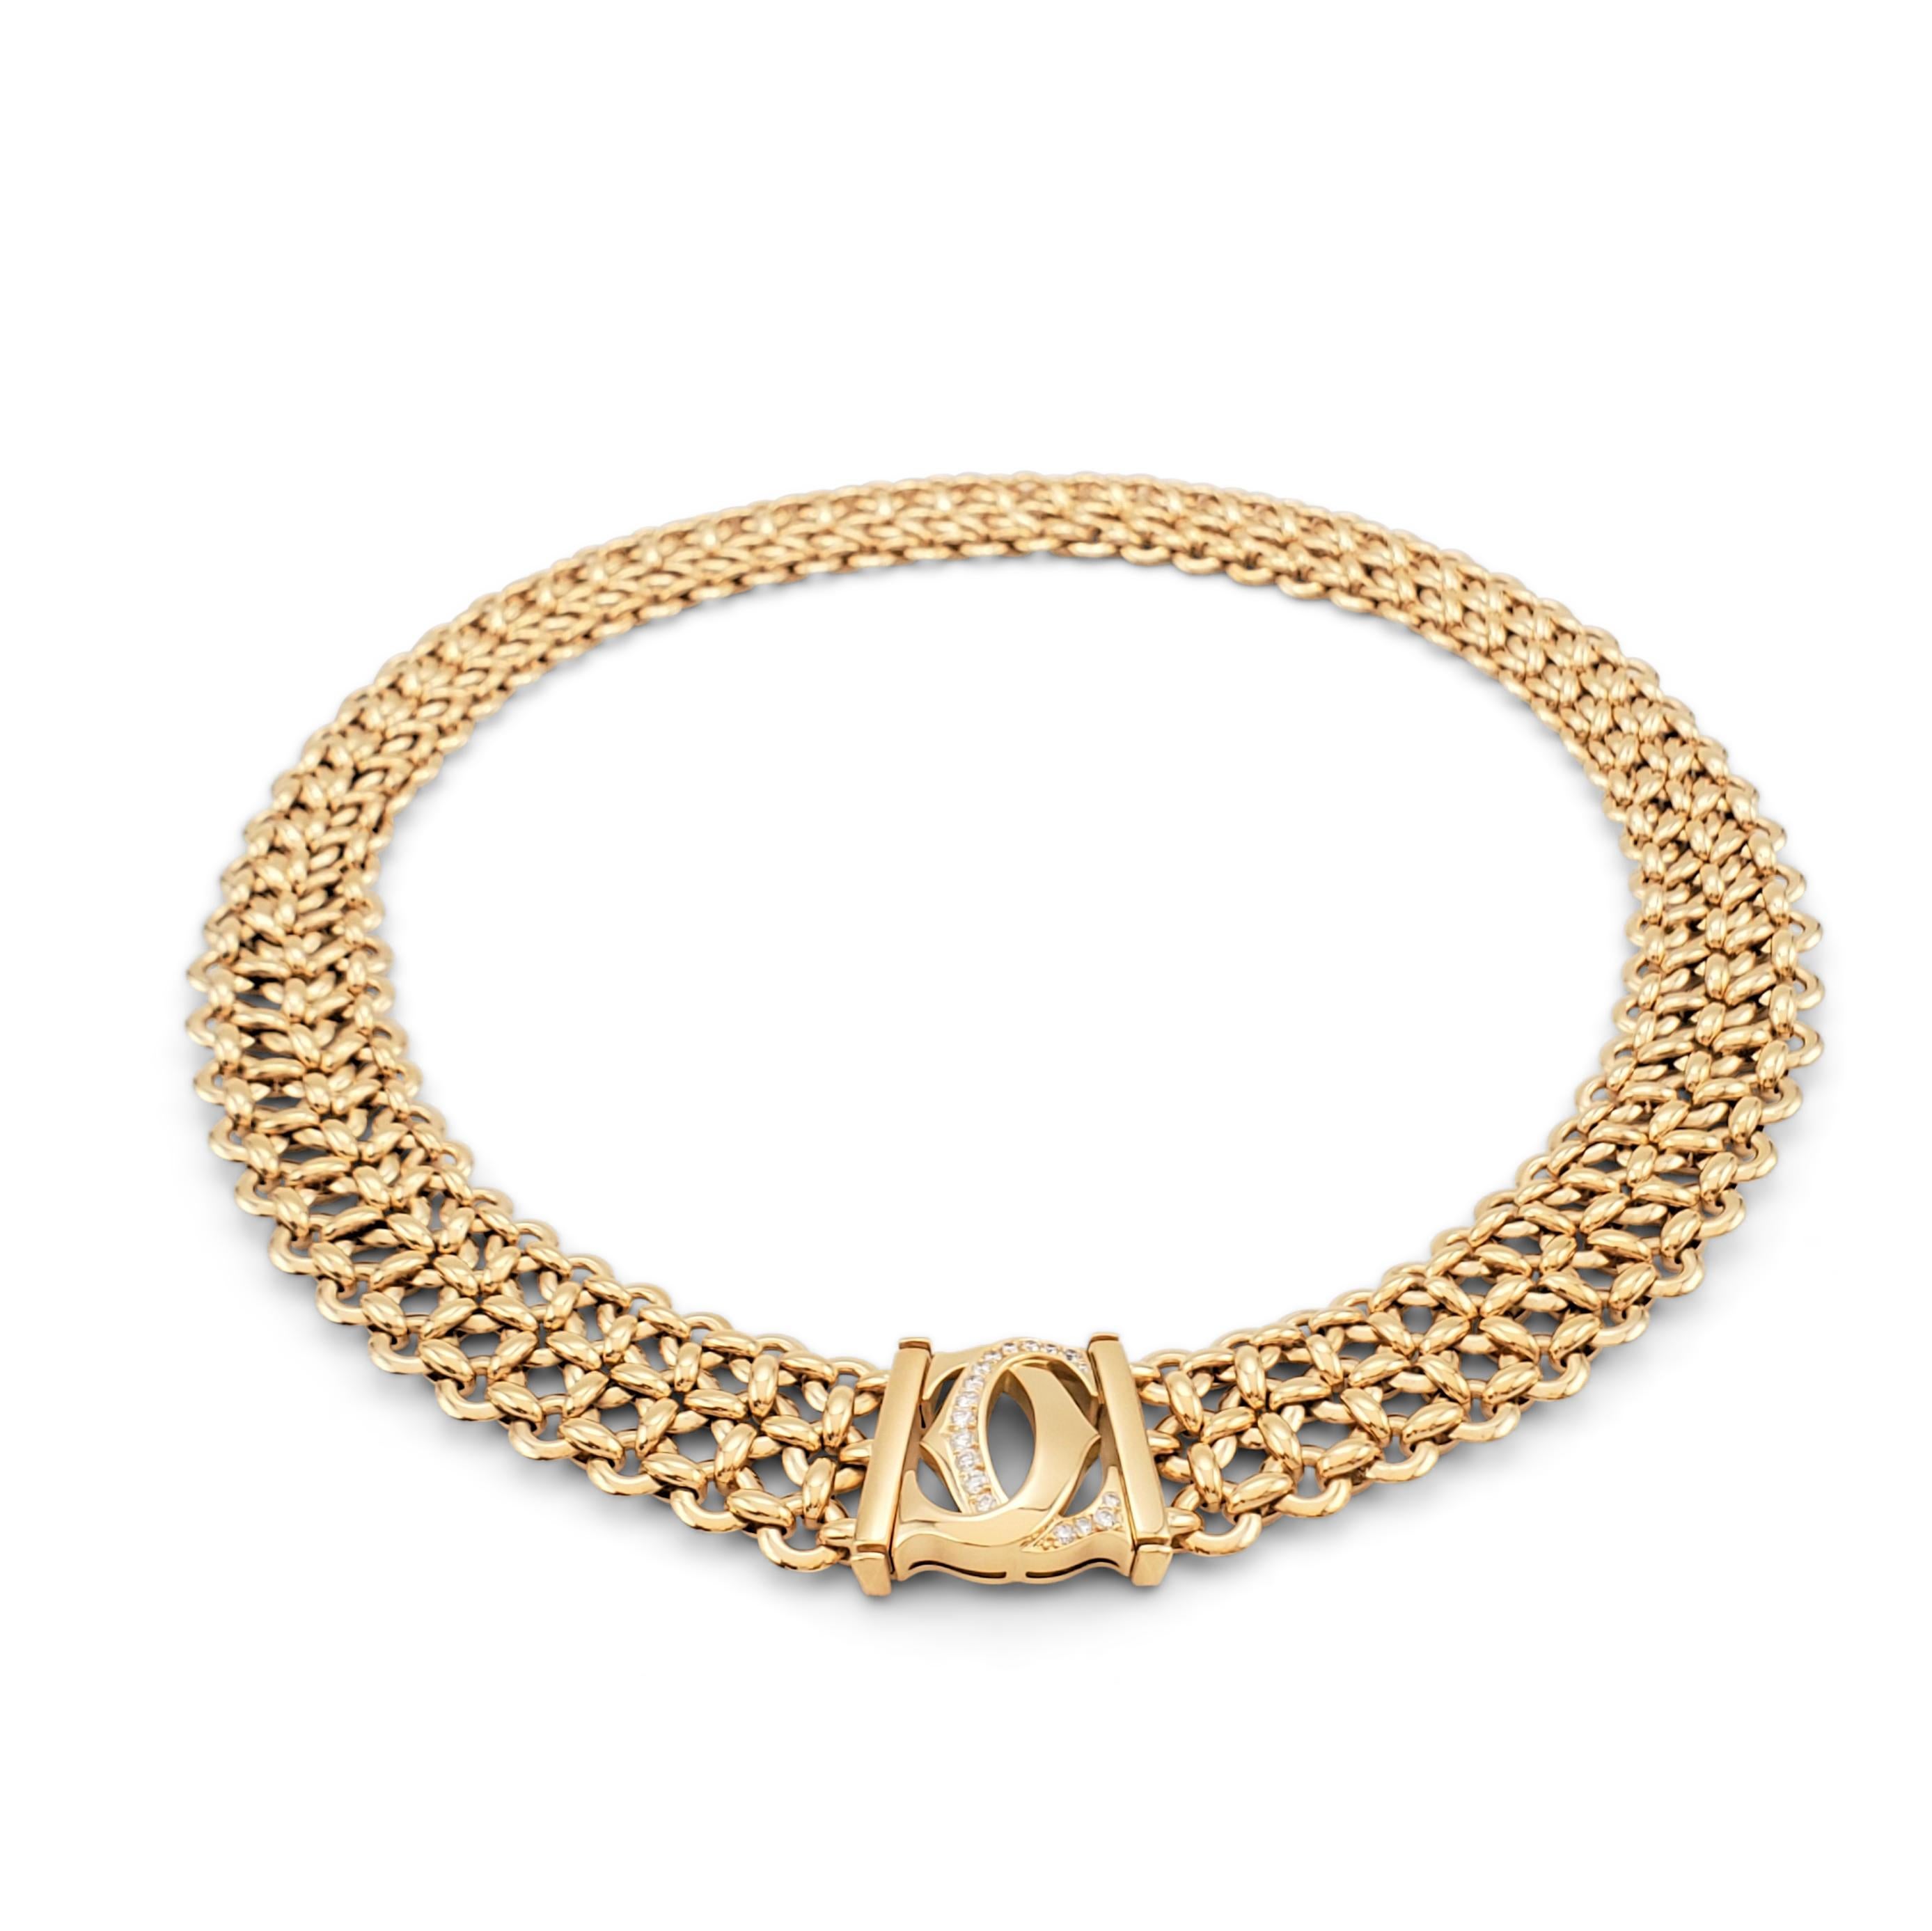 Authentic Cartier 'Penelope' necklace comprised of three-rows of 18 karat yellow gold links centering on the Cartier double-C motif which is set with an estimated 0.30 carats of round brilliant cut diamonds (E-F color, VS clarity). Signed Cartier,